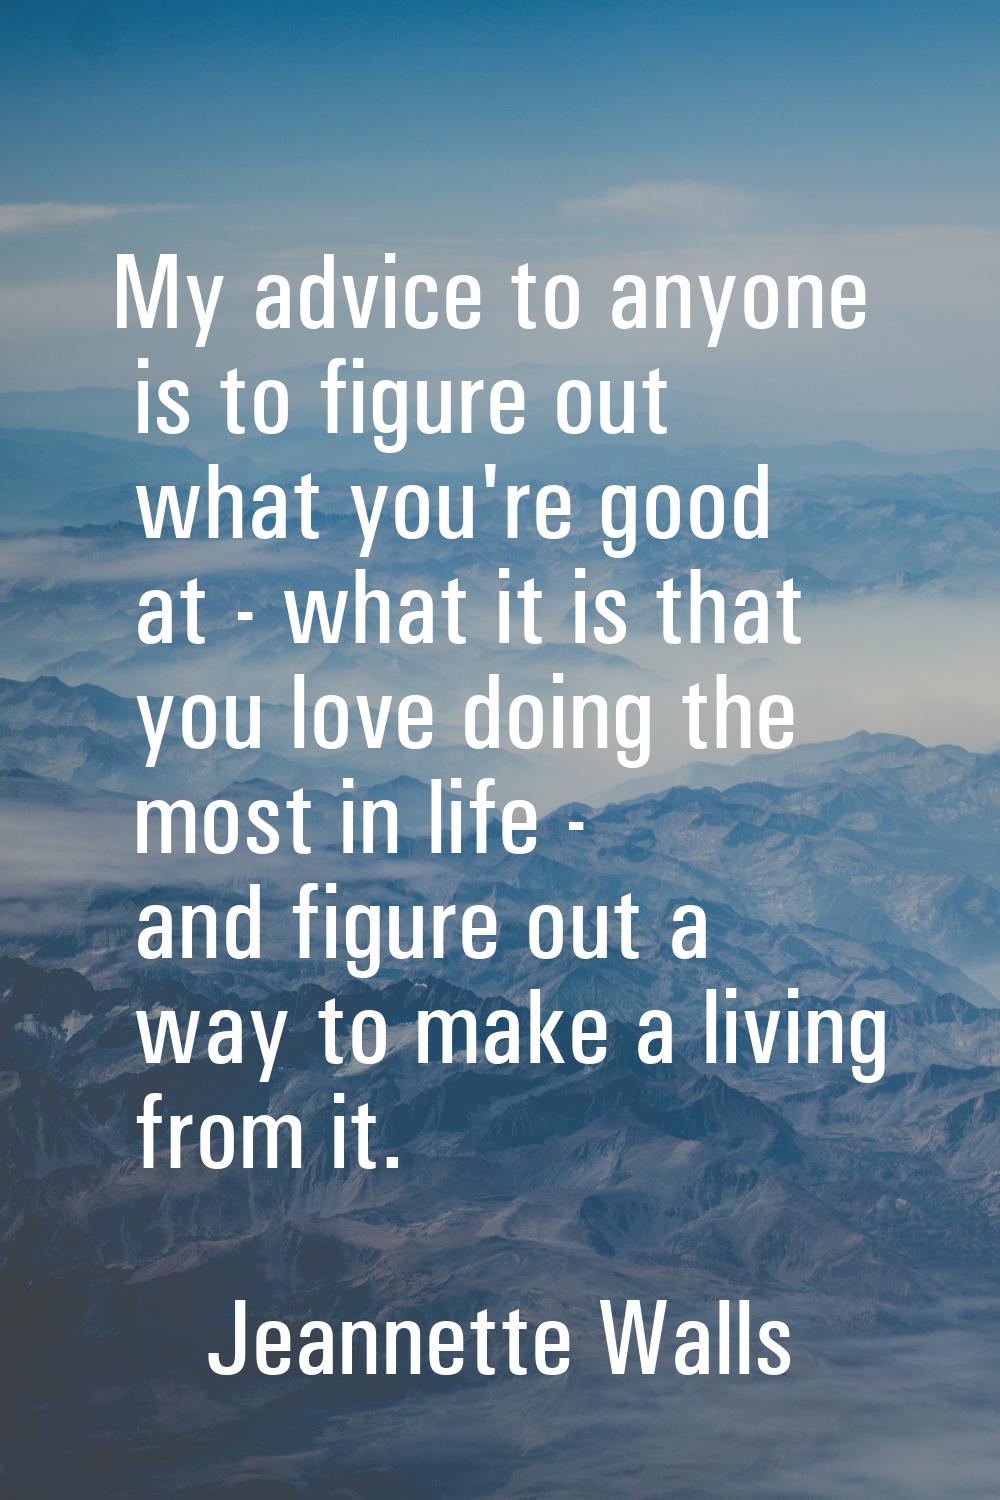 My advice to anyone is to figure out what you're good at - what it is that you love doing the most 